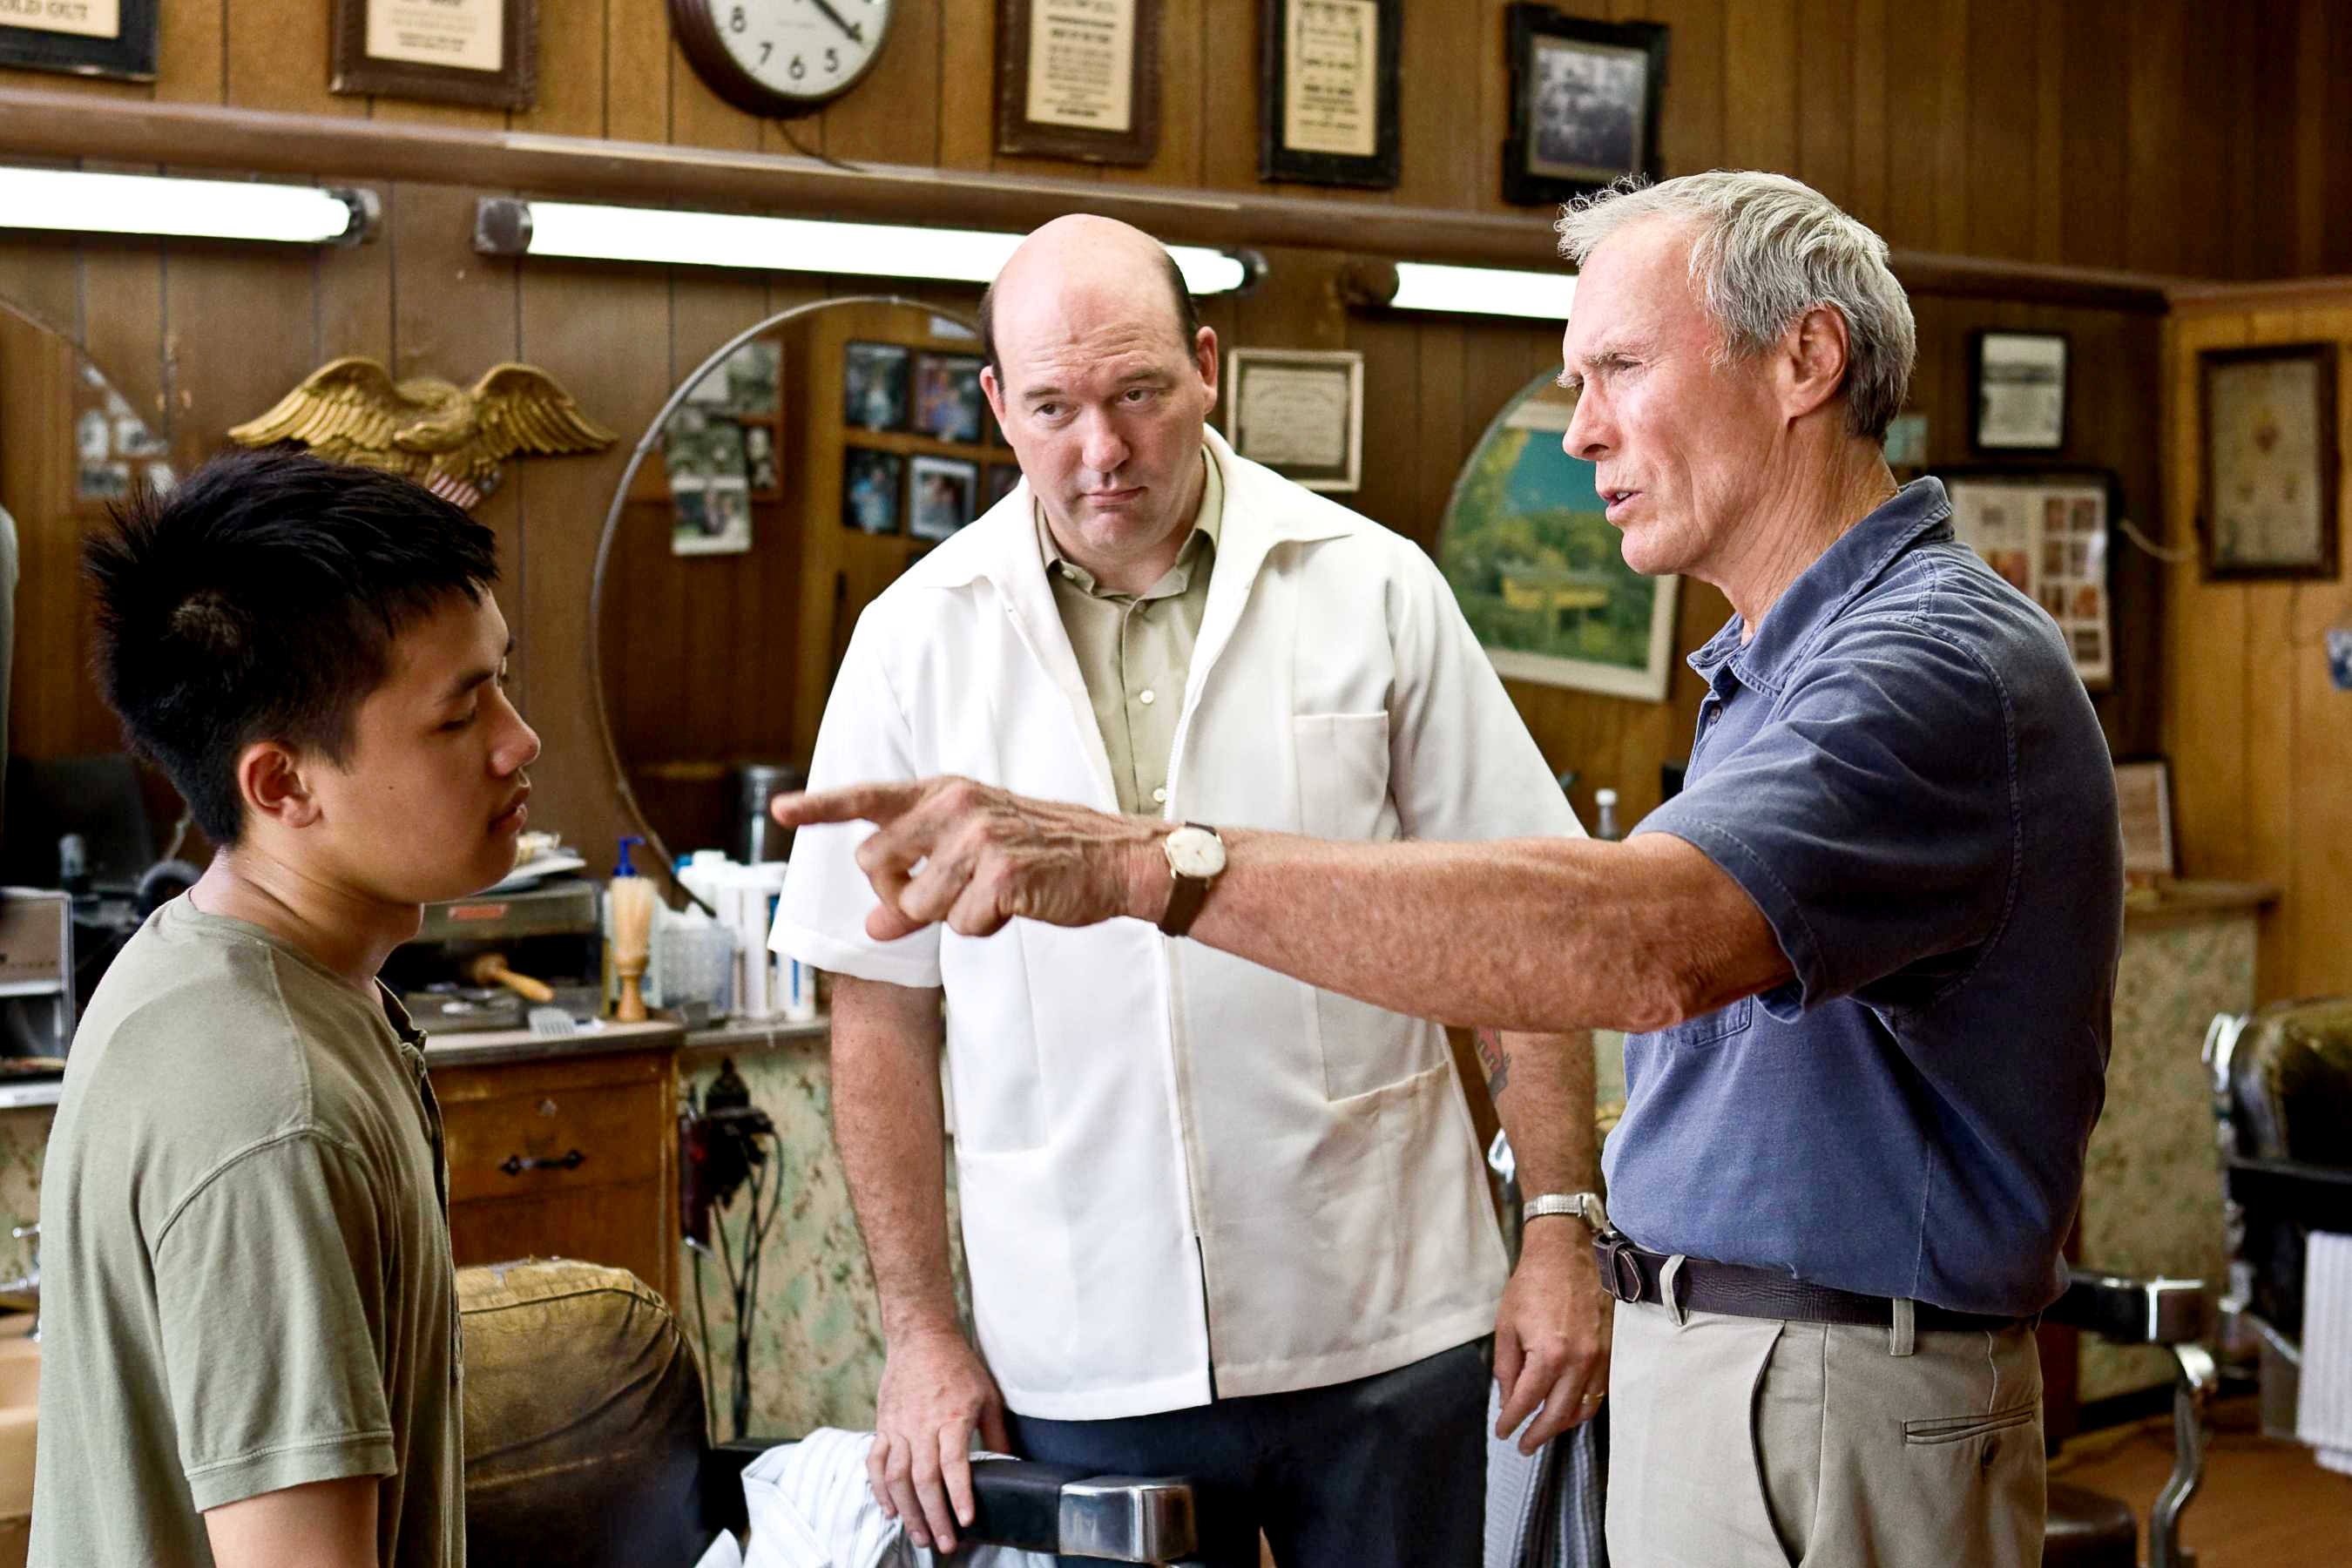 Bee Vang, John Carroll Lynch and Clint Eastwood in Warner Bros. Pictures' Gran Torino (2008). Photo credit by Anthony Michael Rivetti.